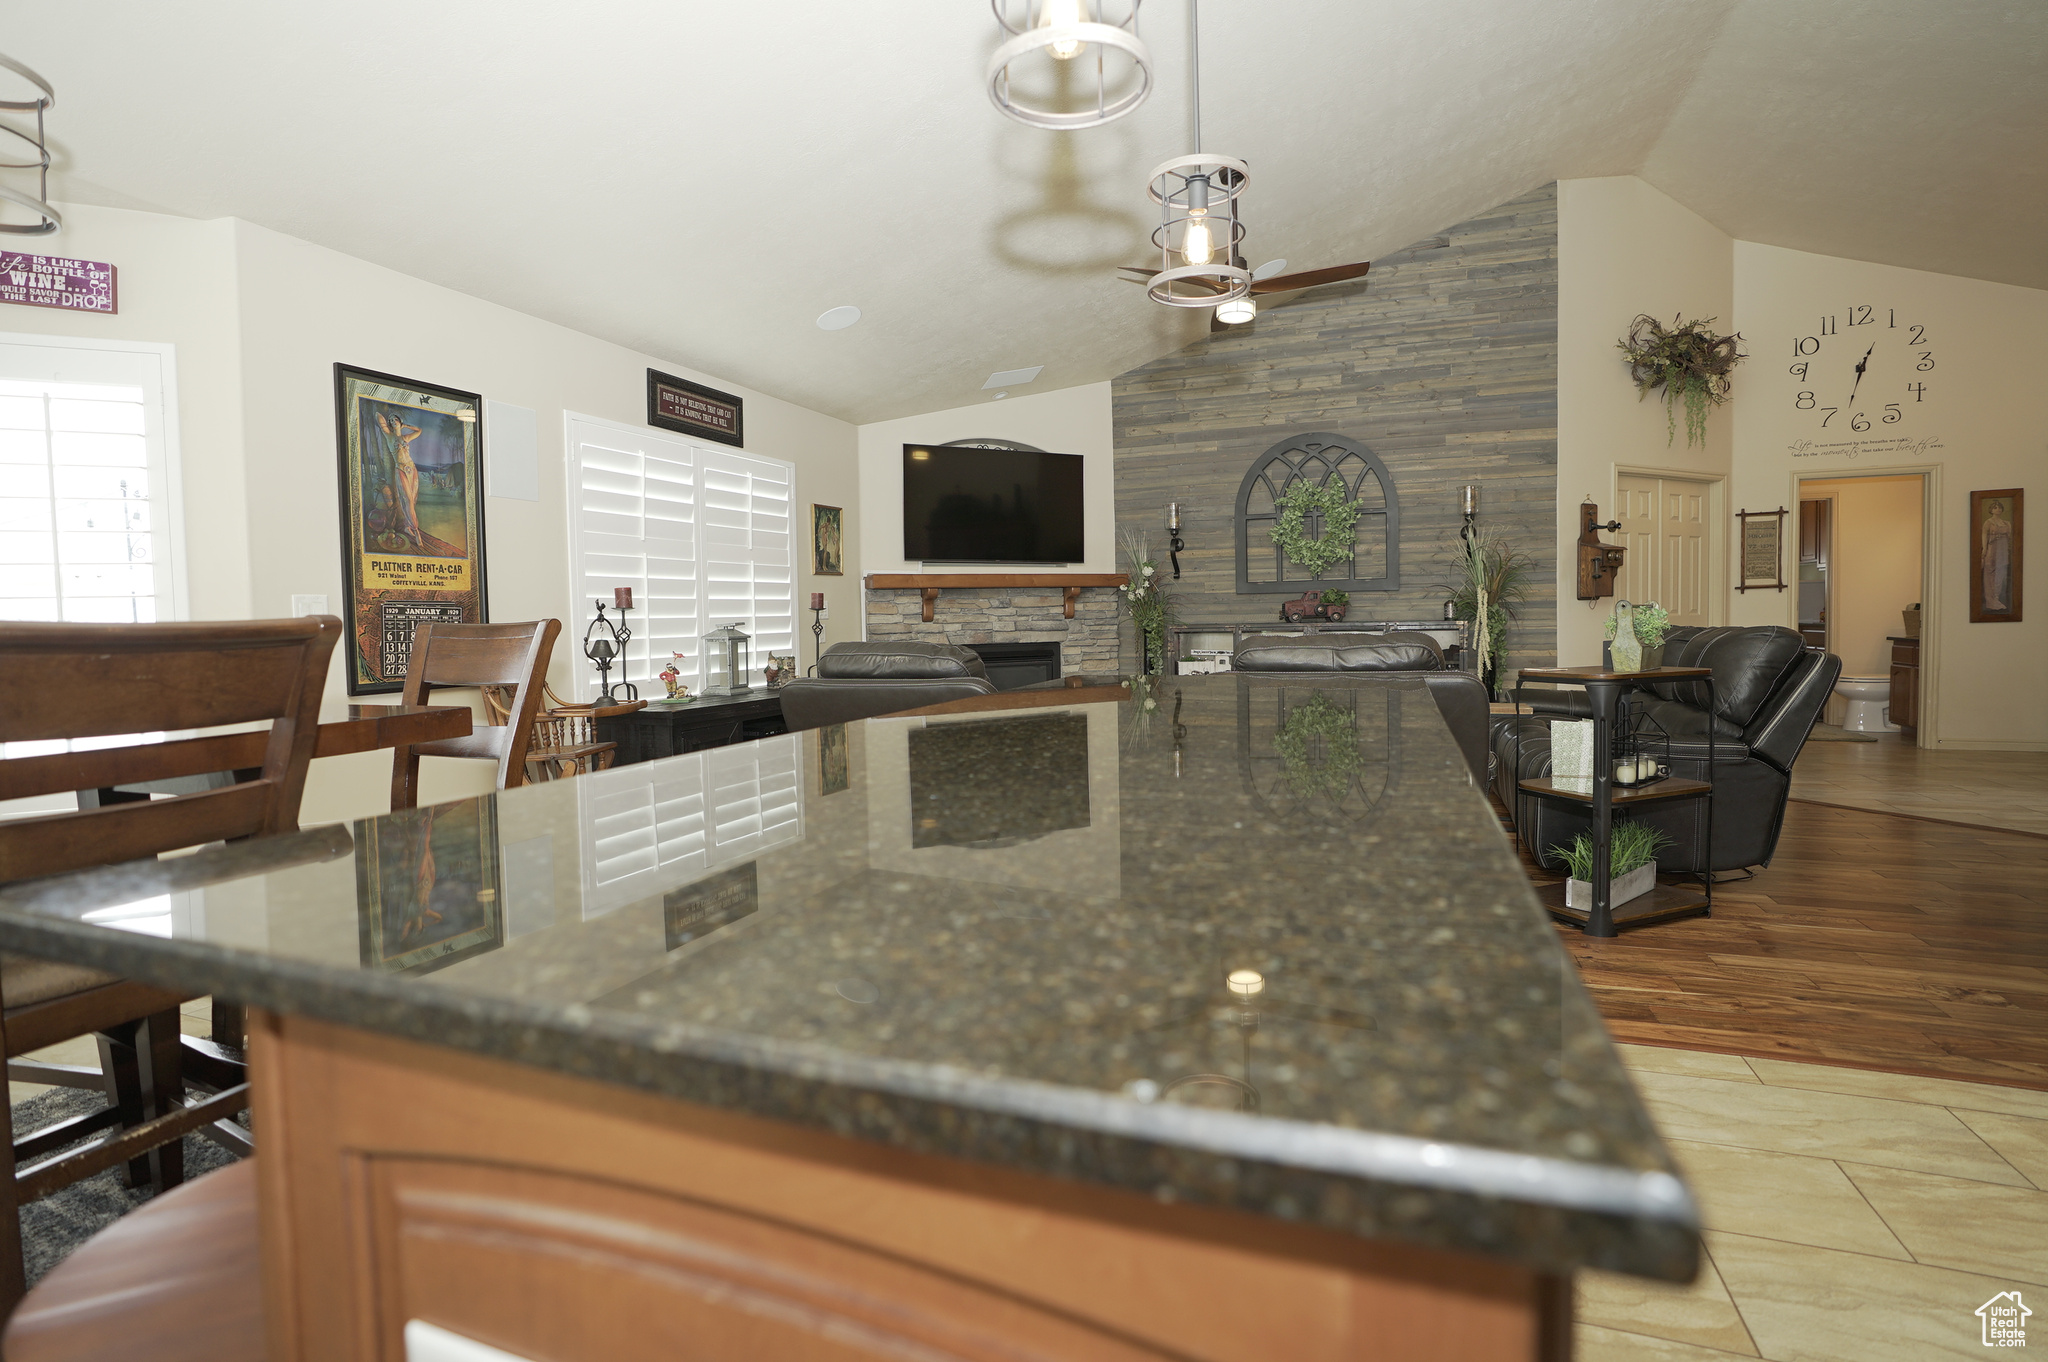 Kitchen with pendant lighting, tile flooring, a stone fireplace, dark stone counters, and ceiling fan